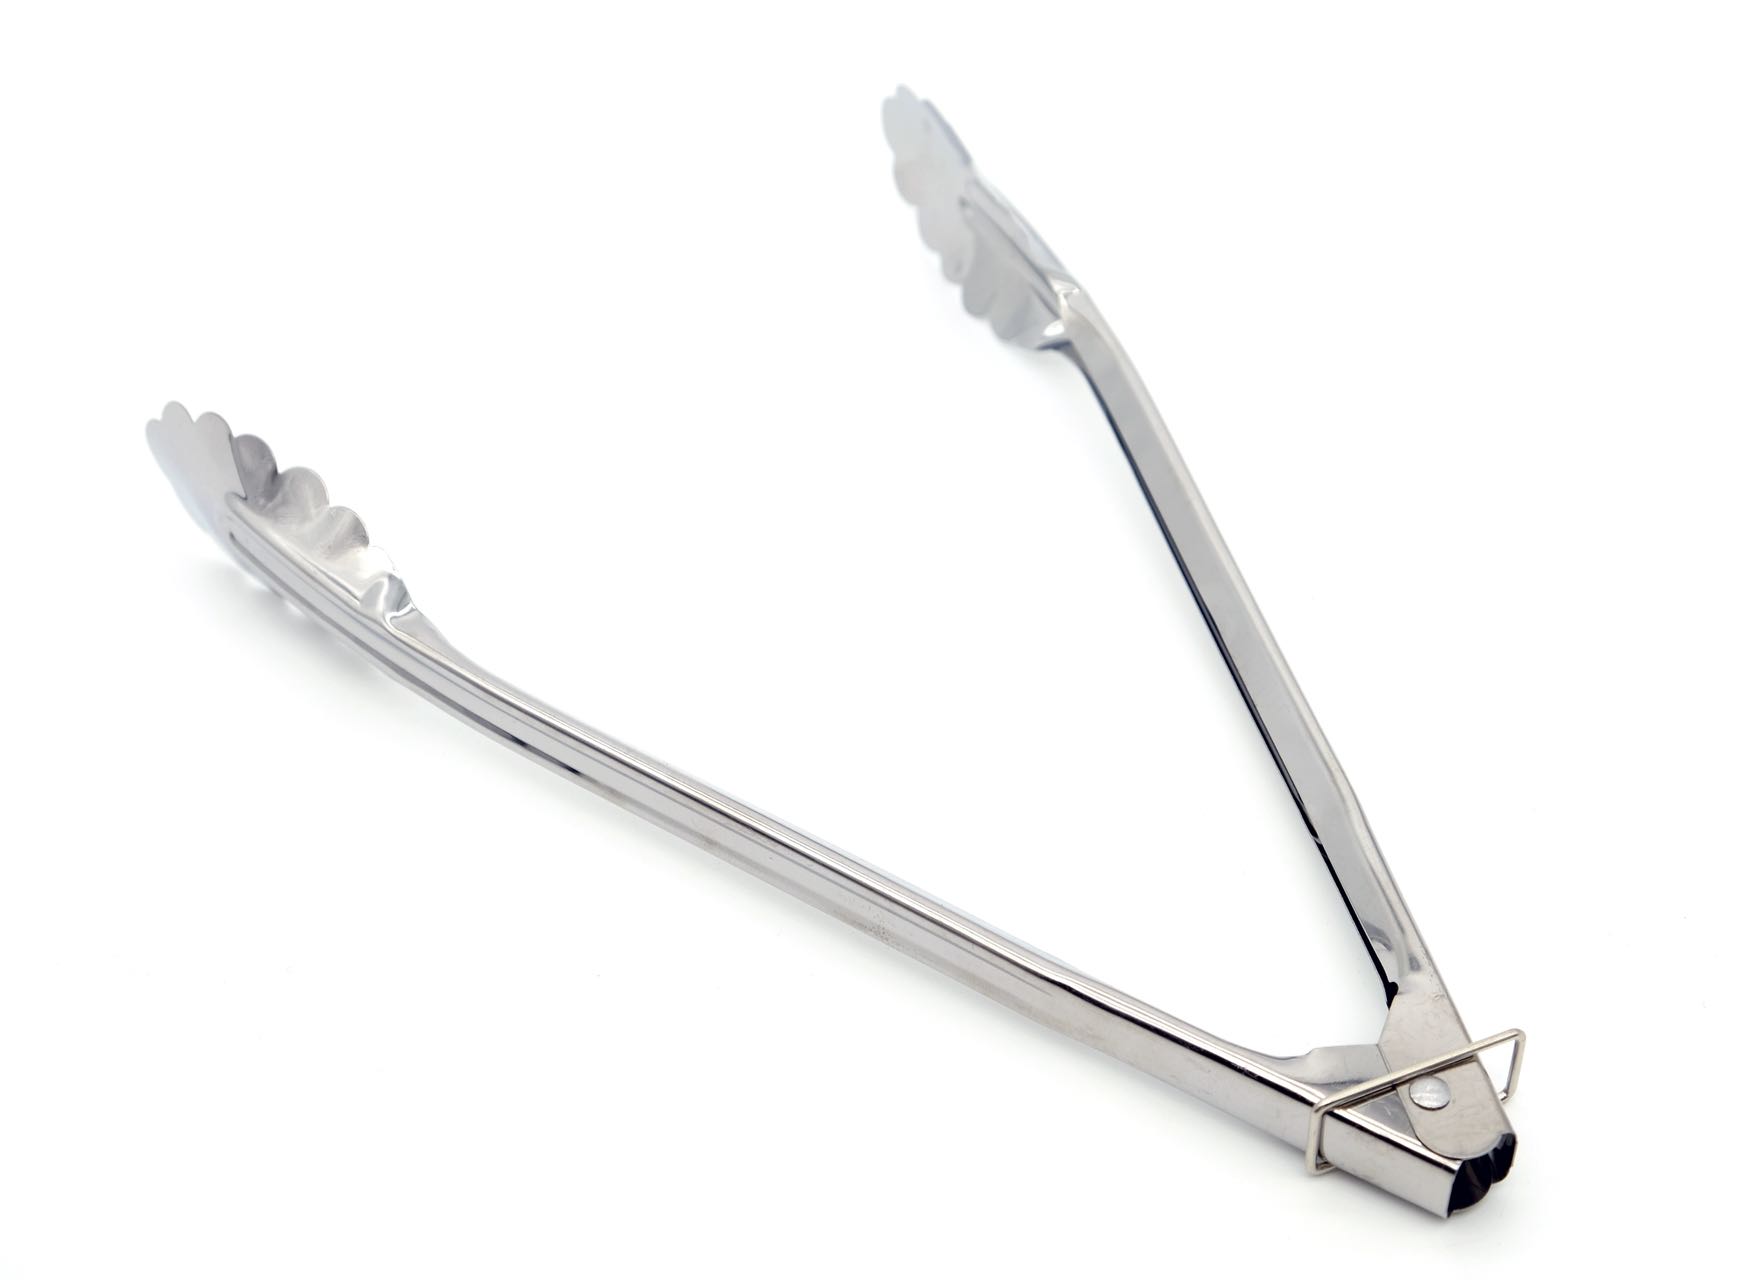 Stainless Steel BBQ Food Tongs for Grilling and Cooking